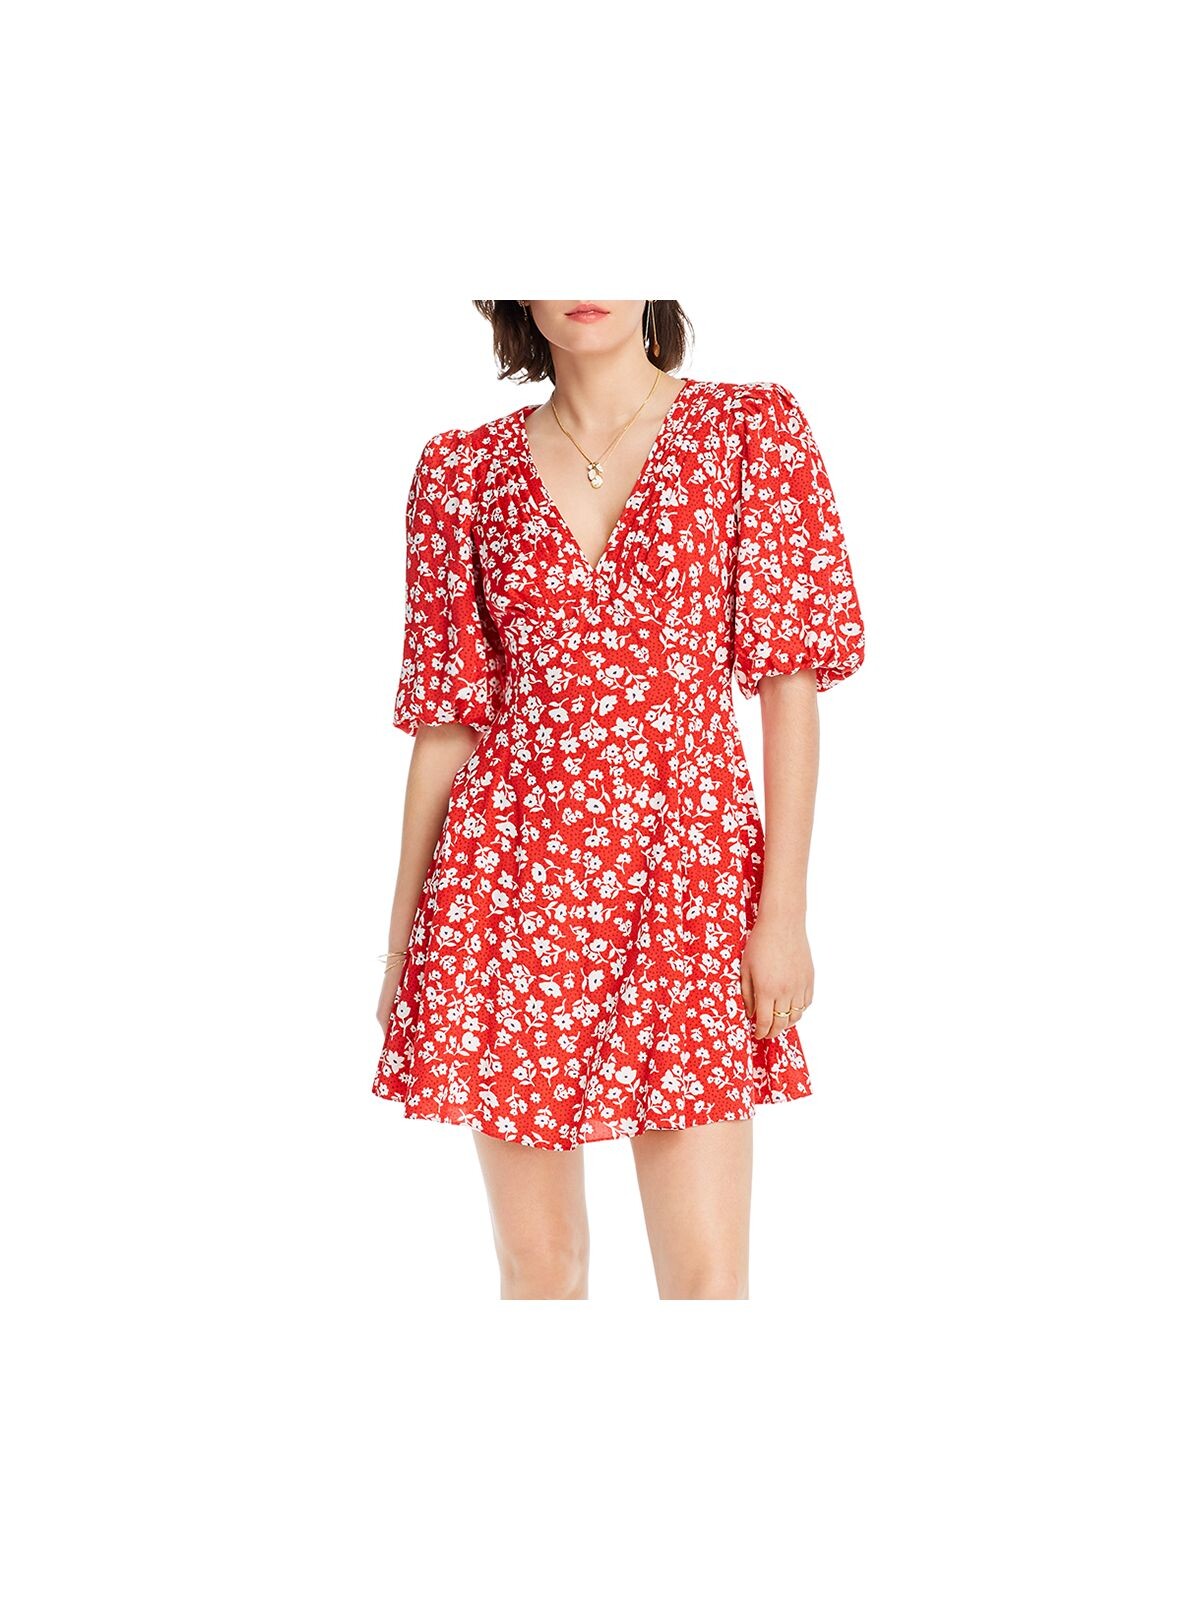 LINI Womens Red Printed Pouf V Neck Above The Knee Fit + Flare Dress XS